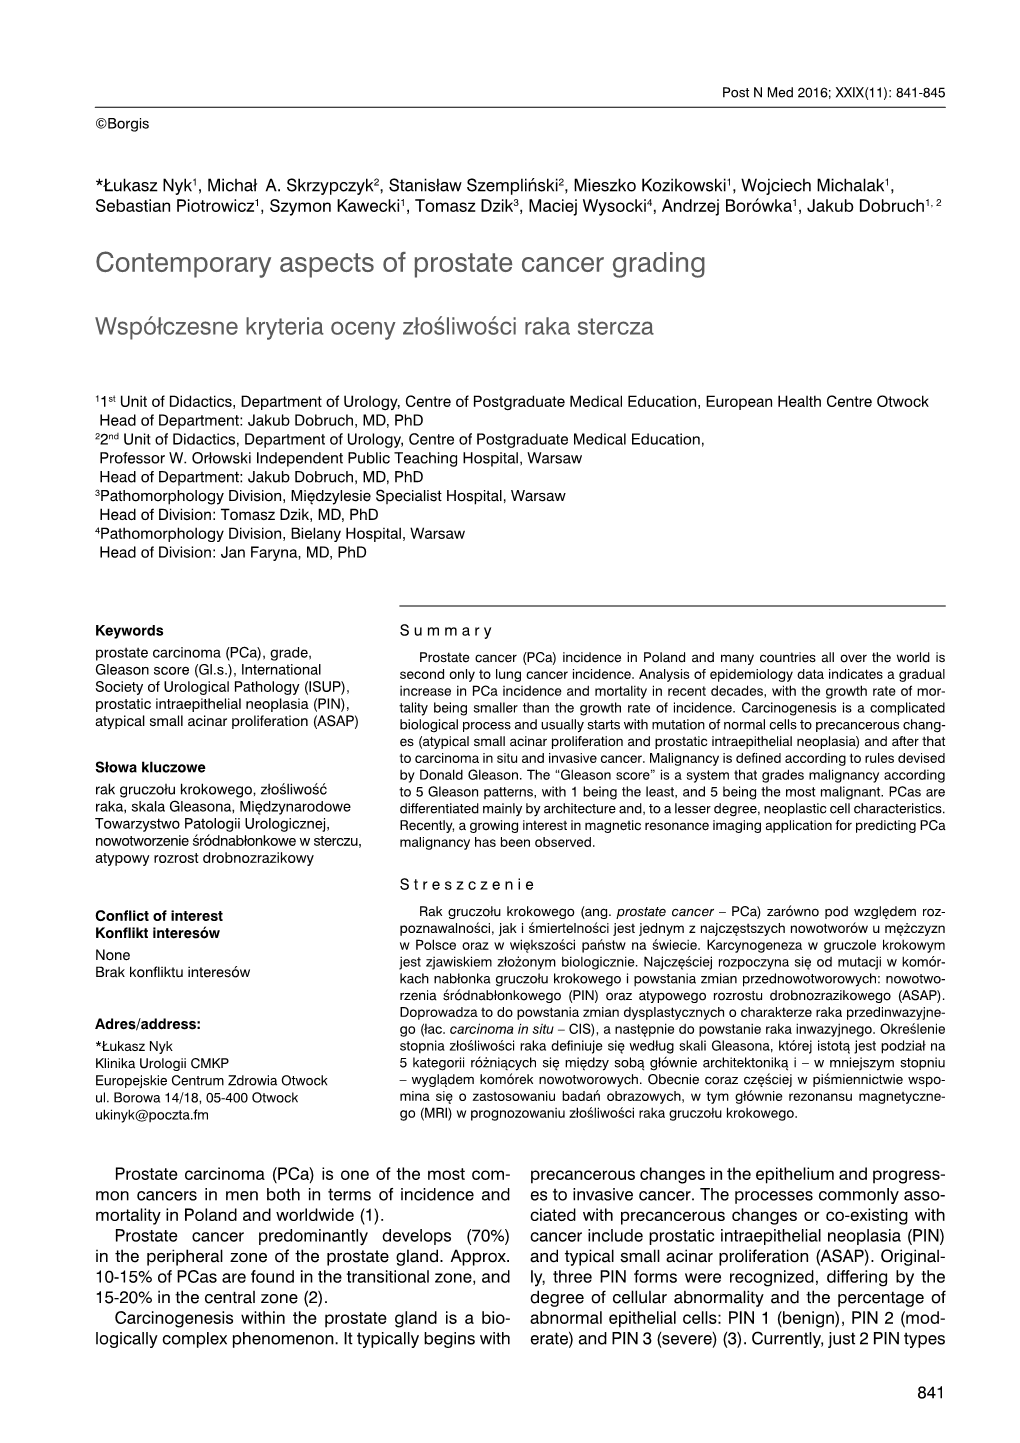 Contemporary Aspects of Prostate Cancer Grading